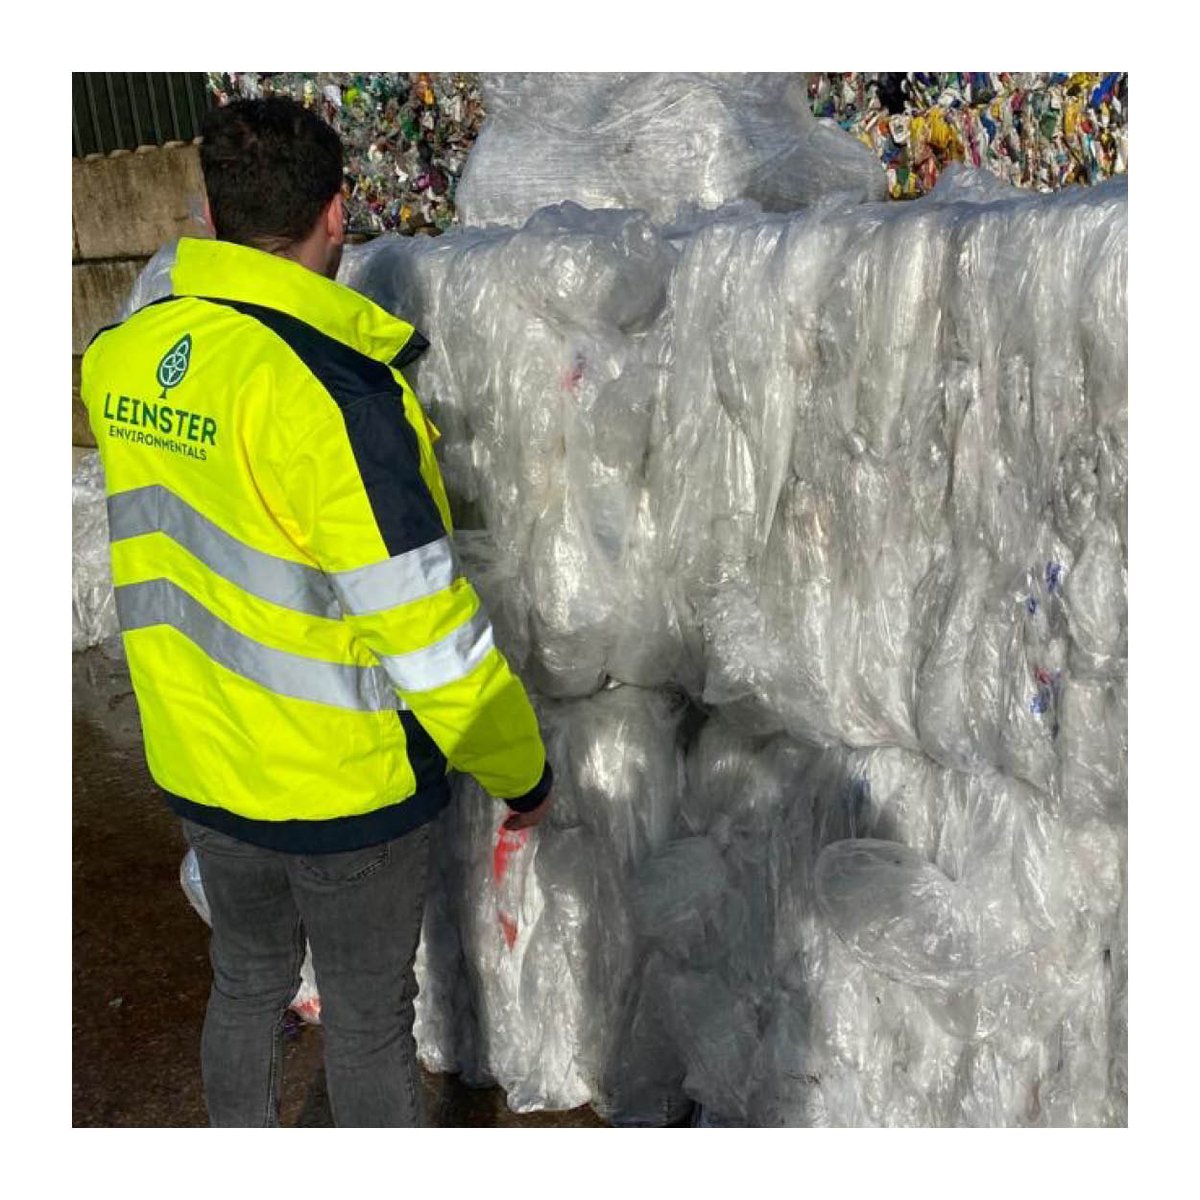 Day 9 of 12 days of Christmas: Plastic Film ♻ We recycle clean end of use plastic film. Recycled LDPE film is made into such items as garbage cans, paneling, furniture, flooring and bubble wrap.